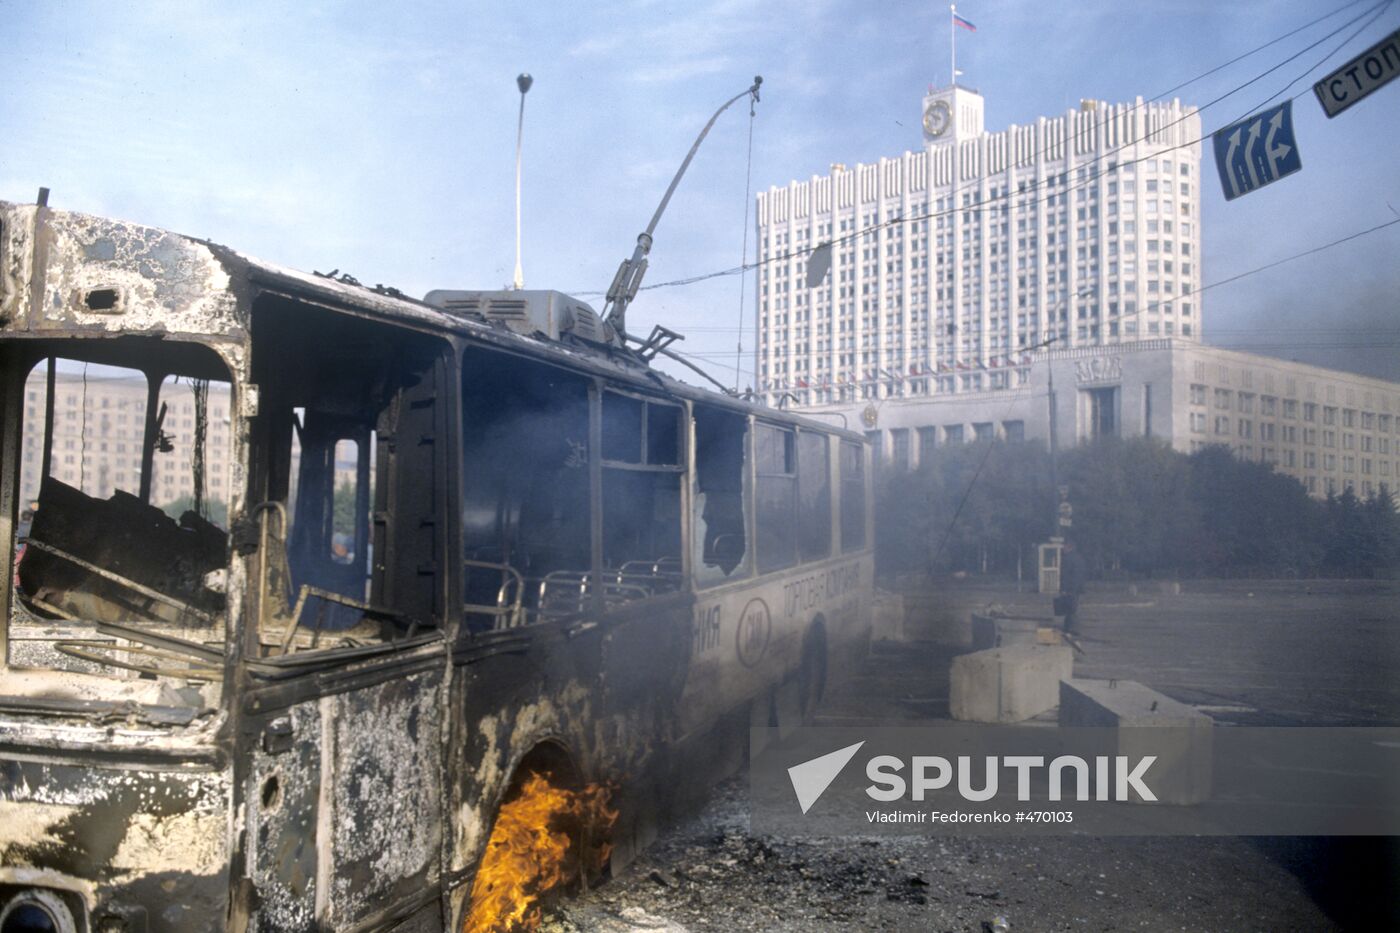 Burnt-out trolleybus near House of the Soviets